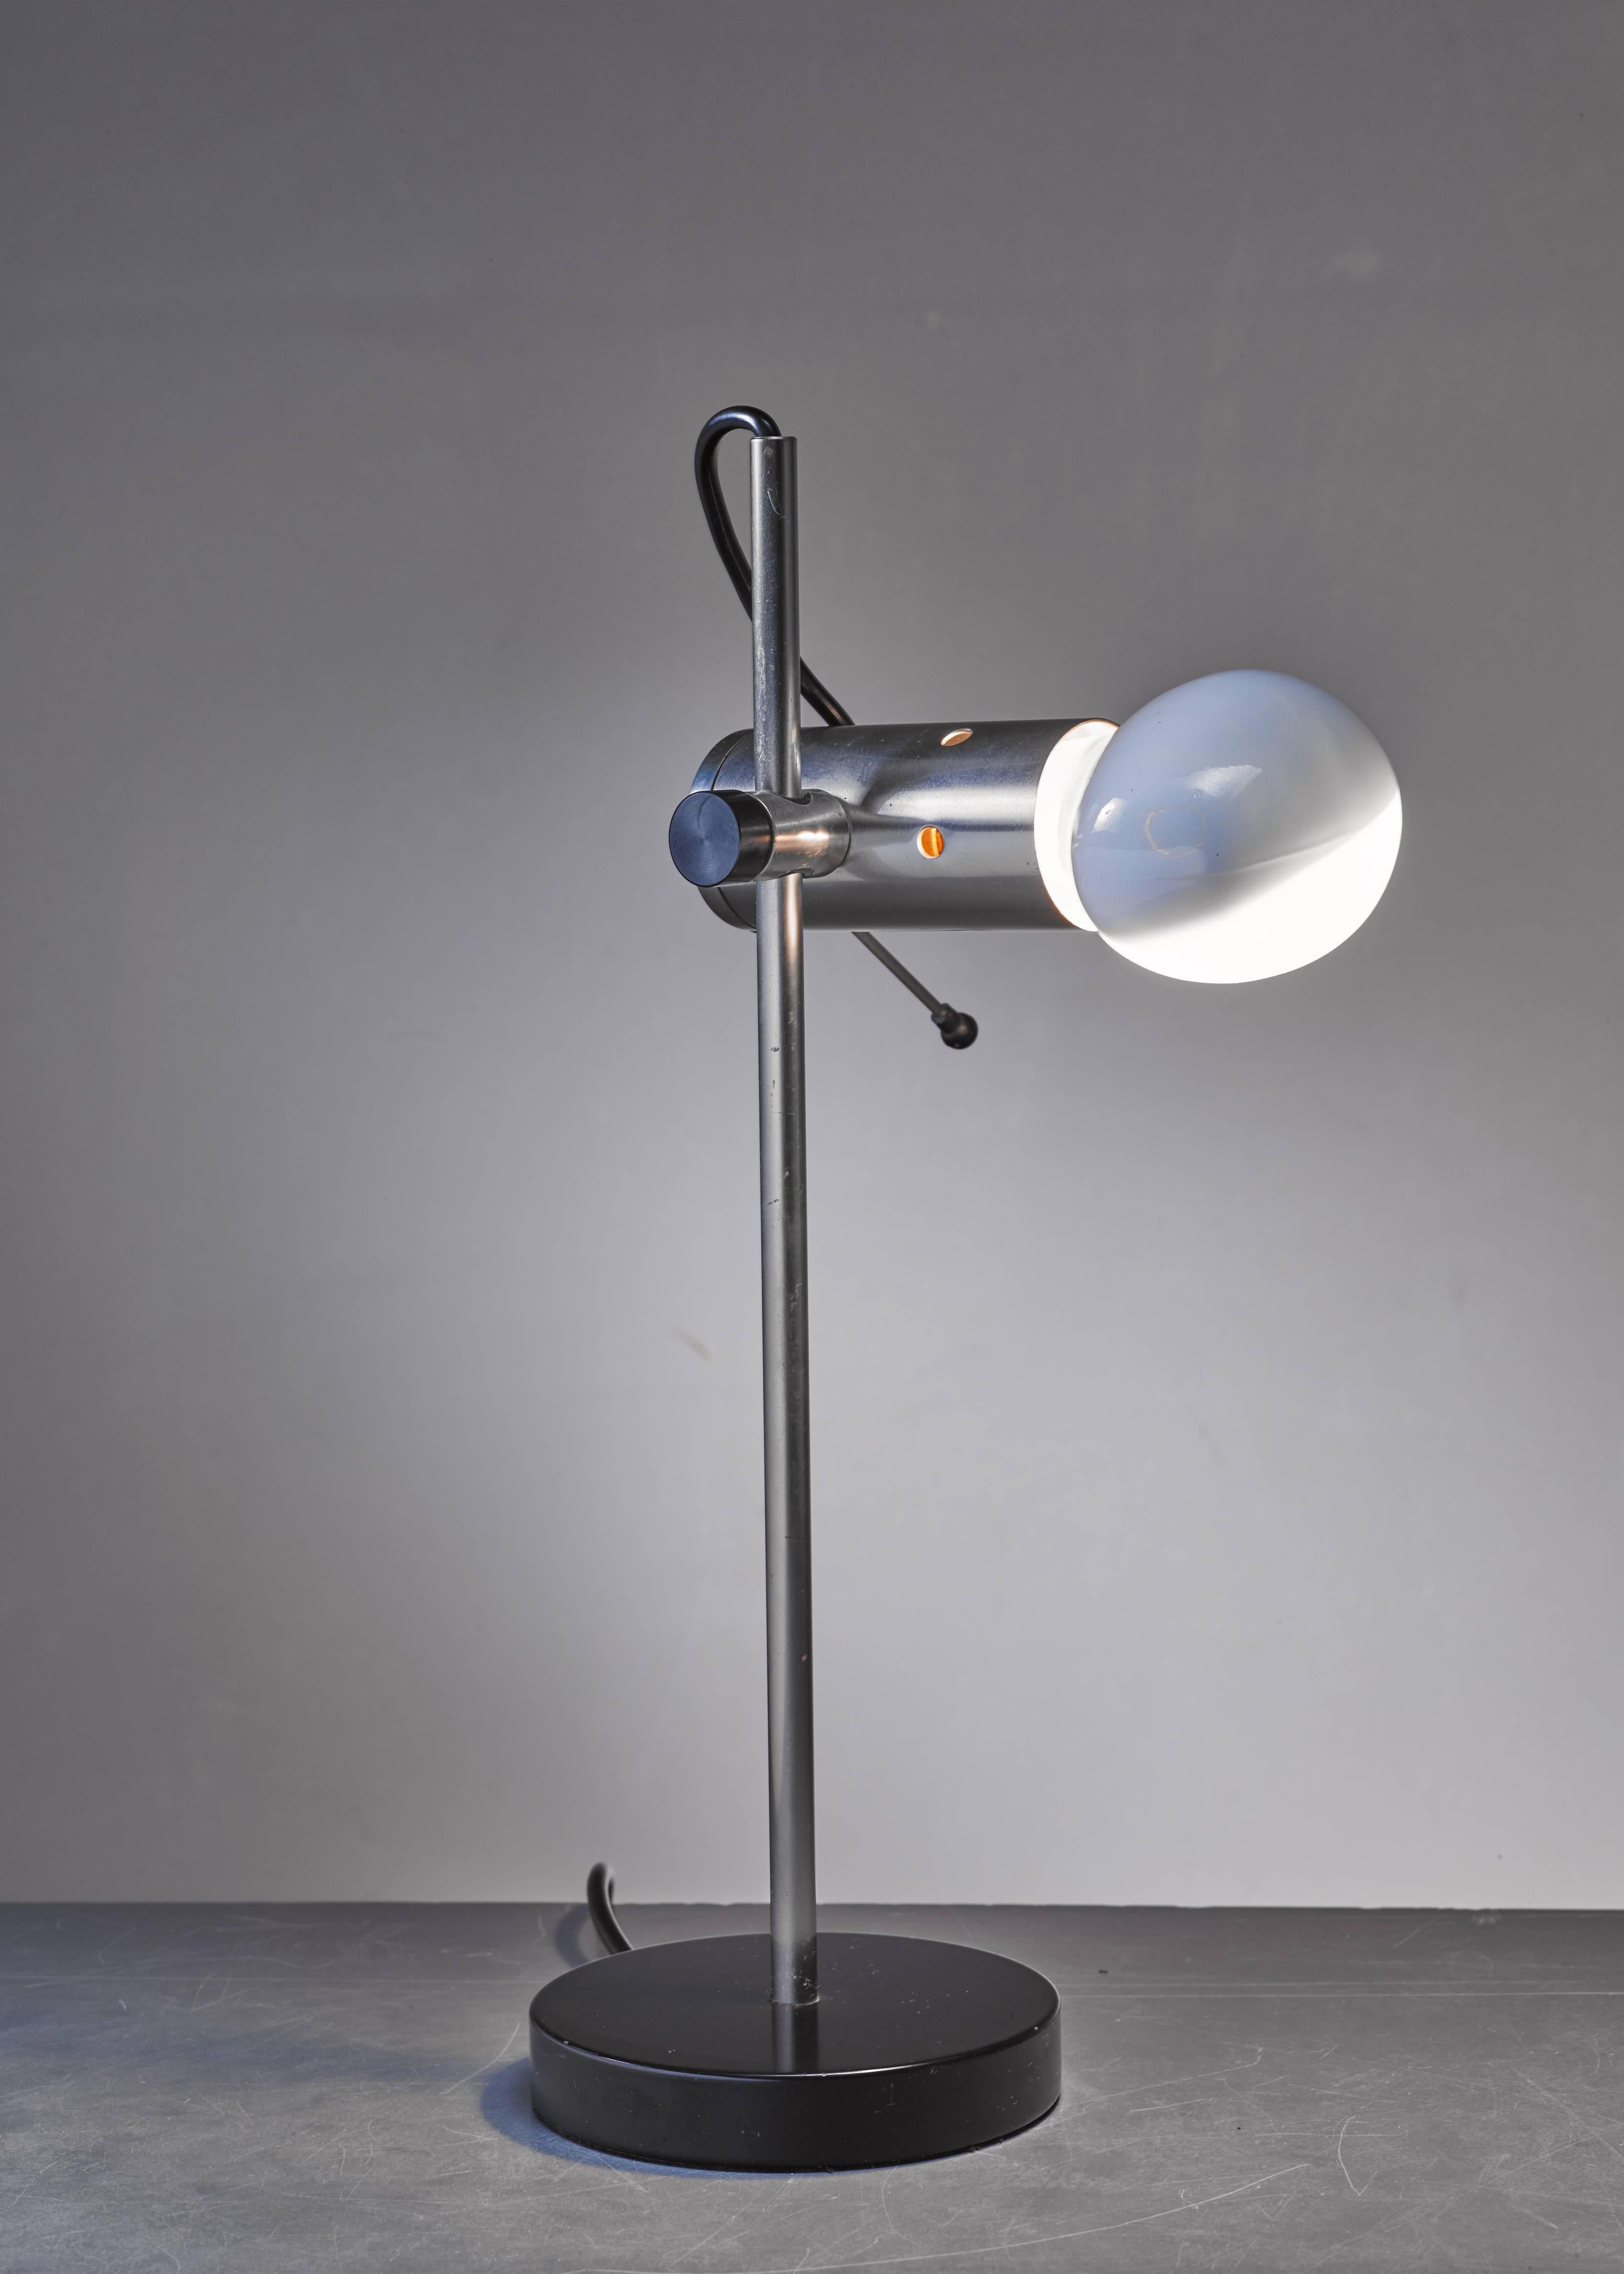 A metal model 251 table lamp by Tito Agnoli for O-Luce. The shade is height-adjustable and it can be turned around. The lamp has the original lightbulb.